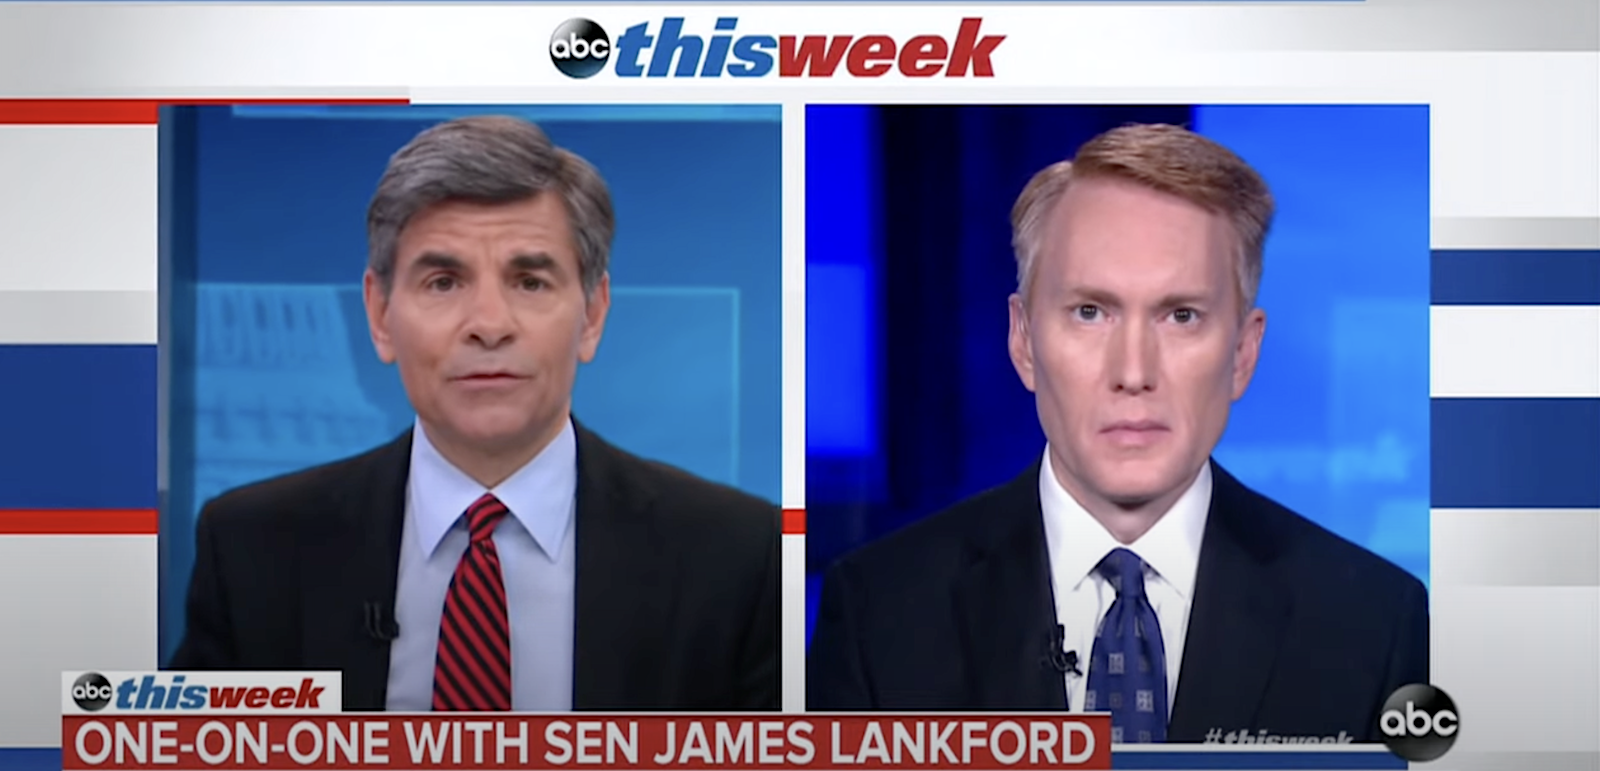 To succeed, Republicans must outsmart and out-tough Sen. James Lankford